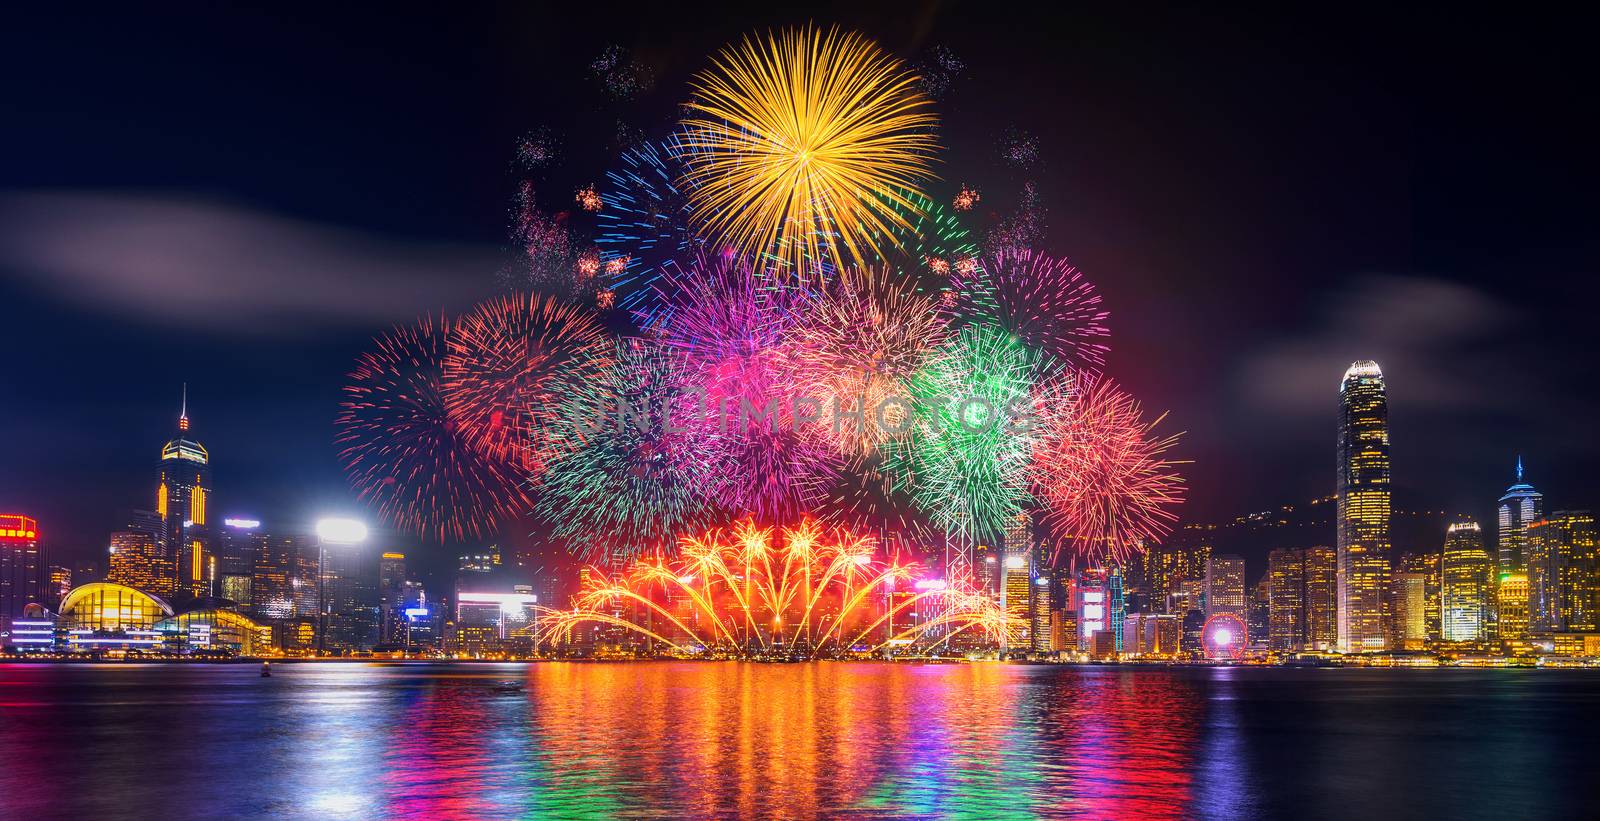 Firework festival in Hong Kong at night. by gutarphotoghaphy